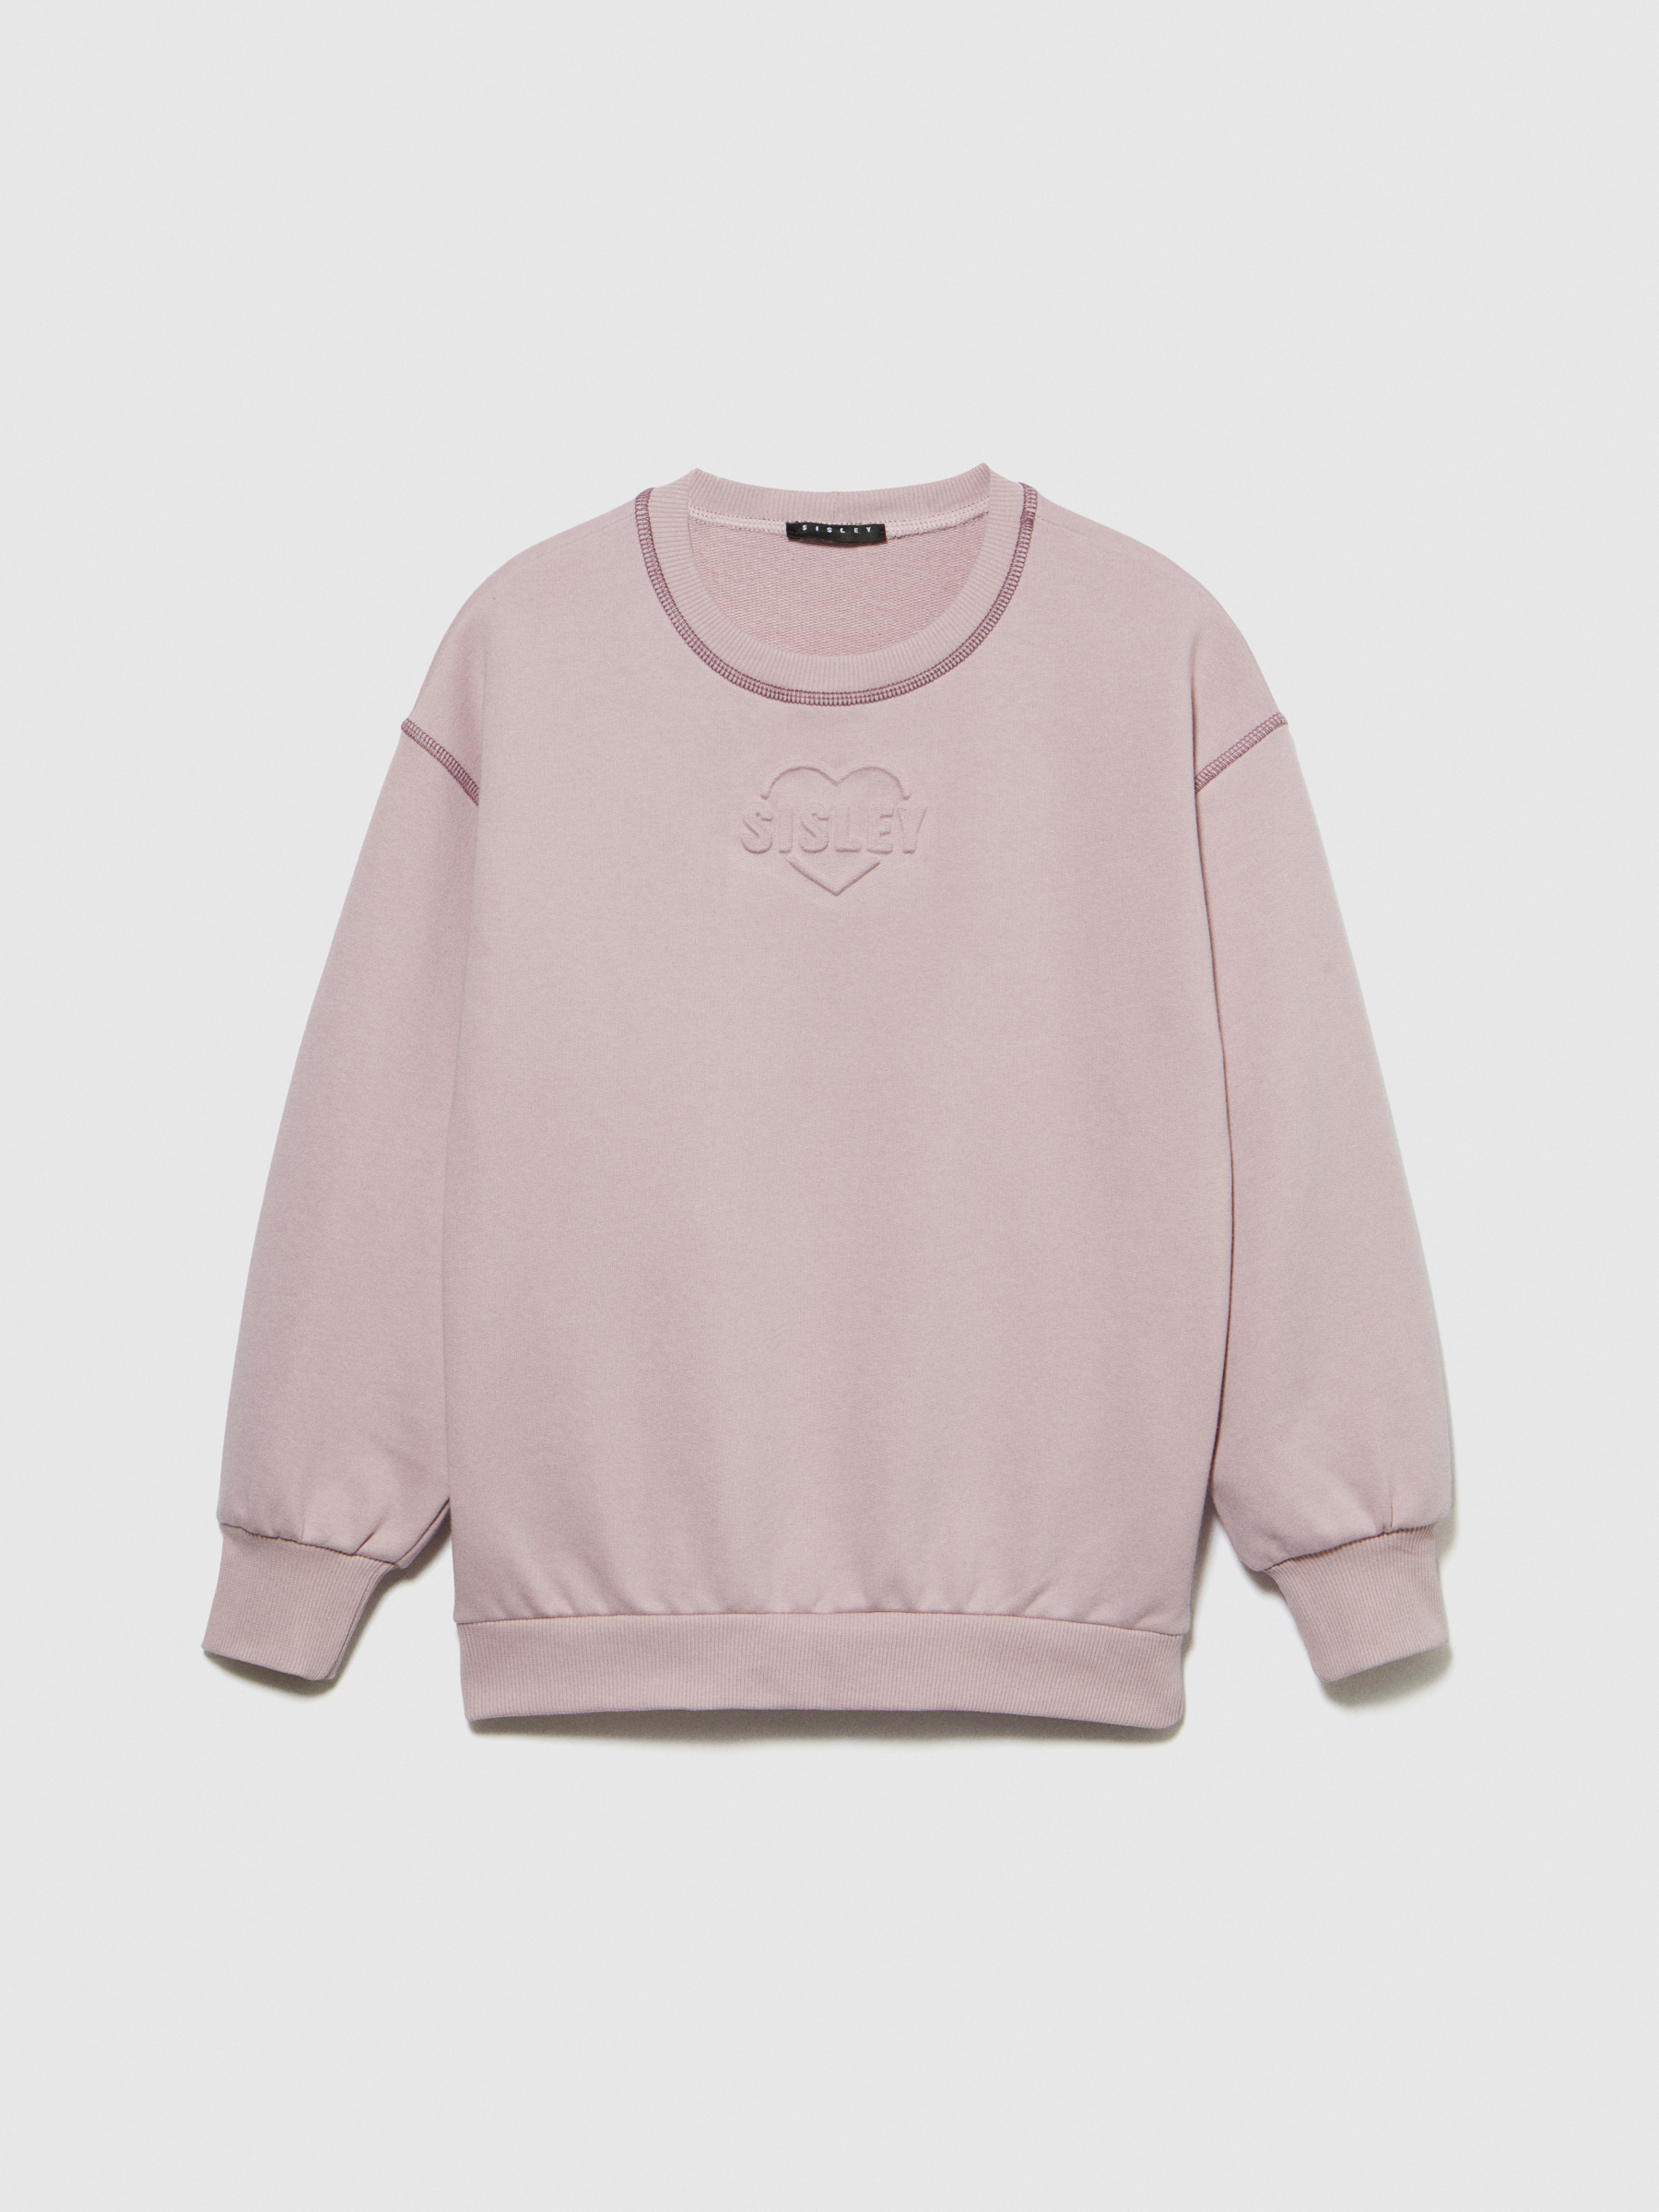 Sisley Young - Sweatshirt With Embossed Print, Woman, Pastel Pink, Size: M